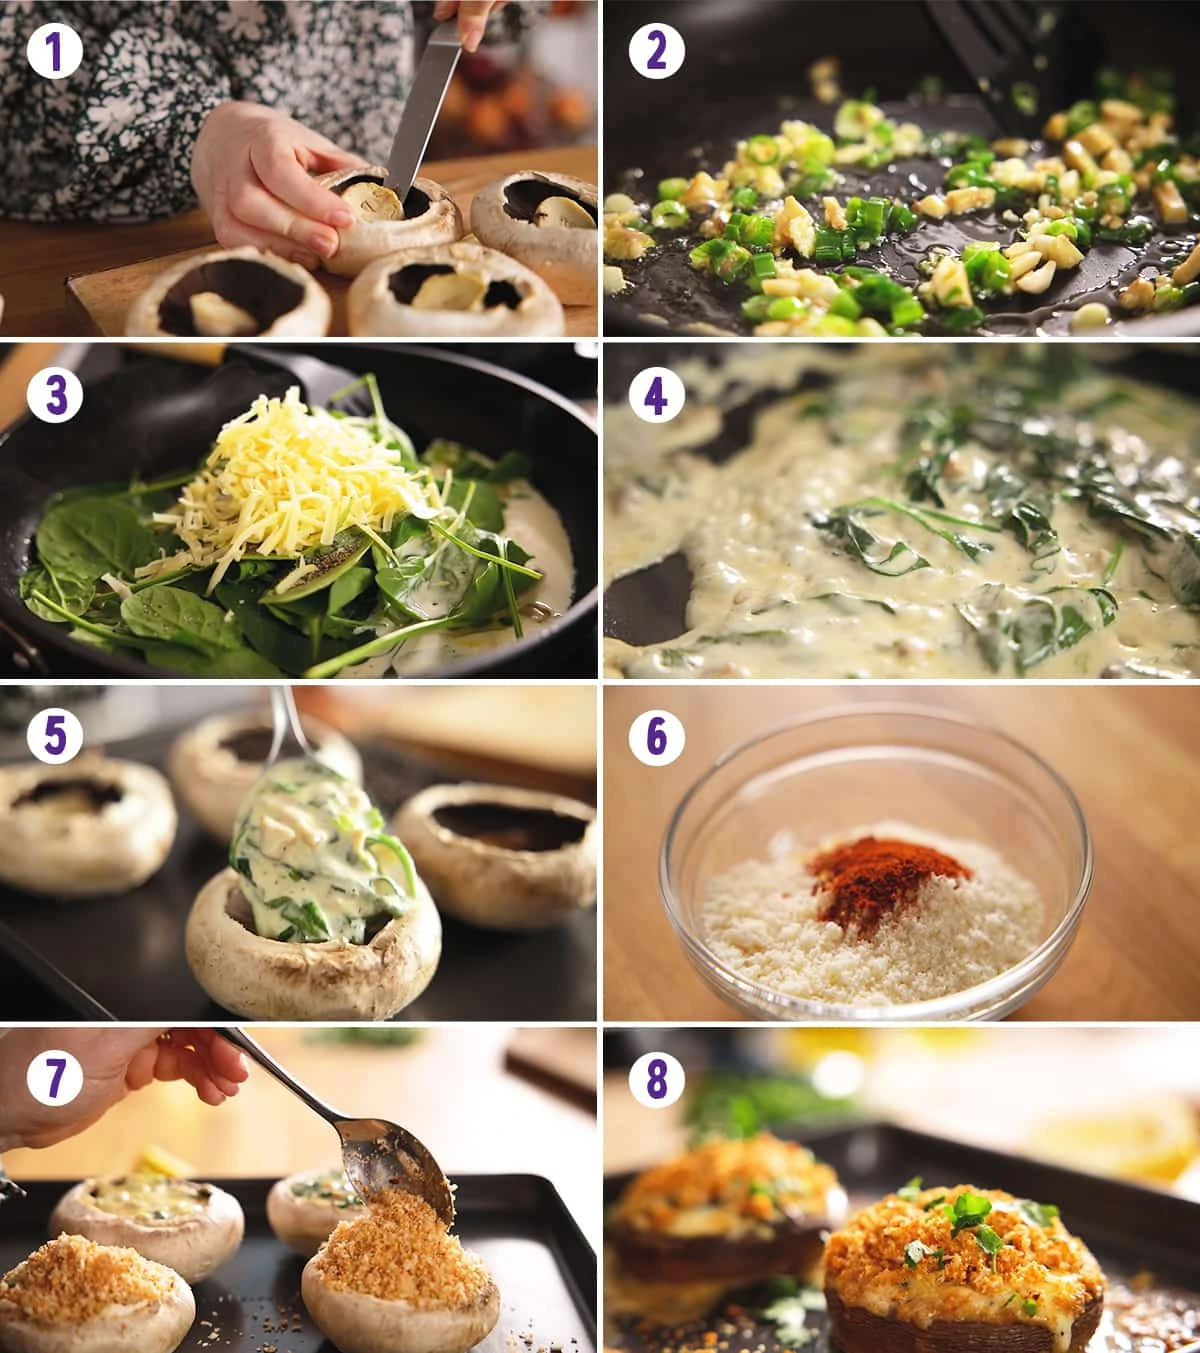 8 image collage showing how to make stuffed mushrooms